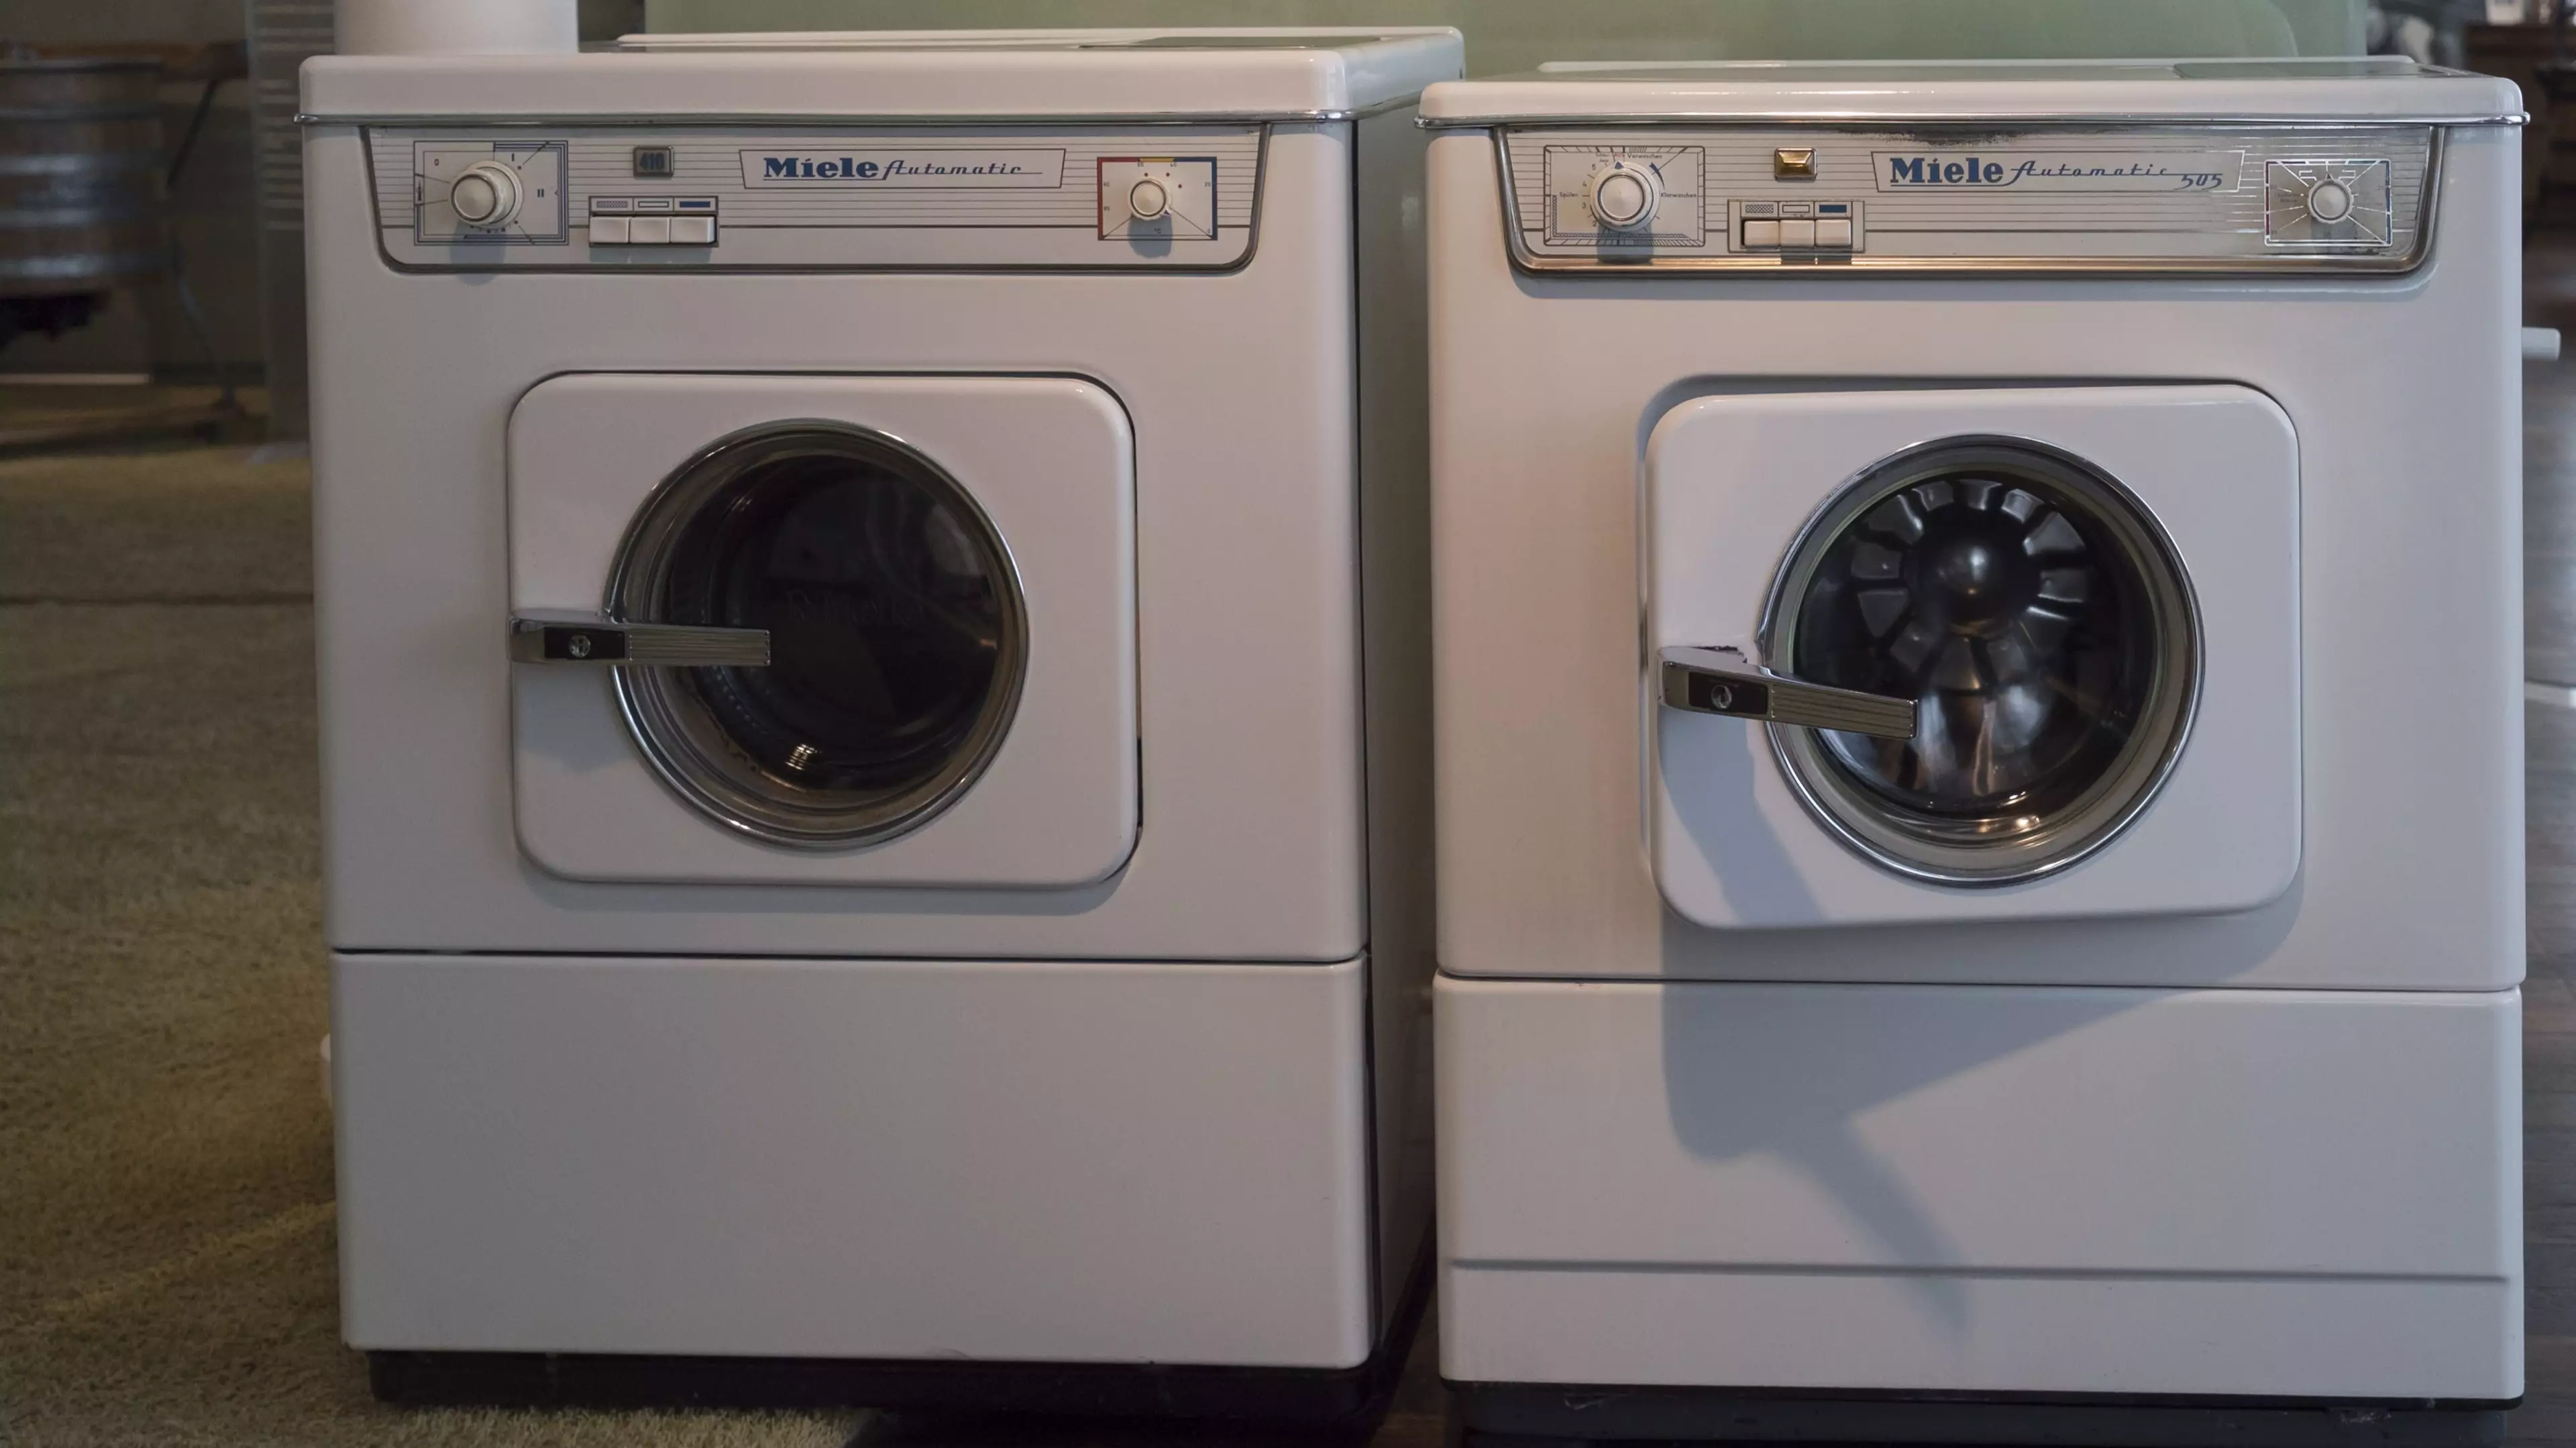 School Installs Laundry Room So That Kids Can Wash Their Clothes